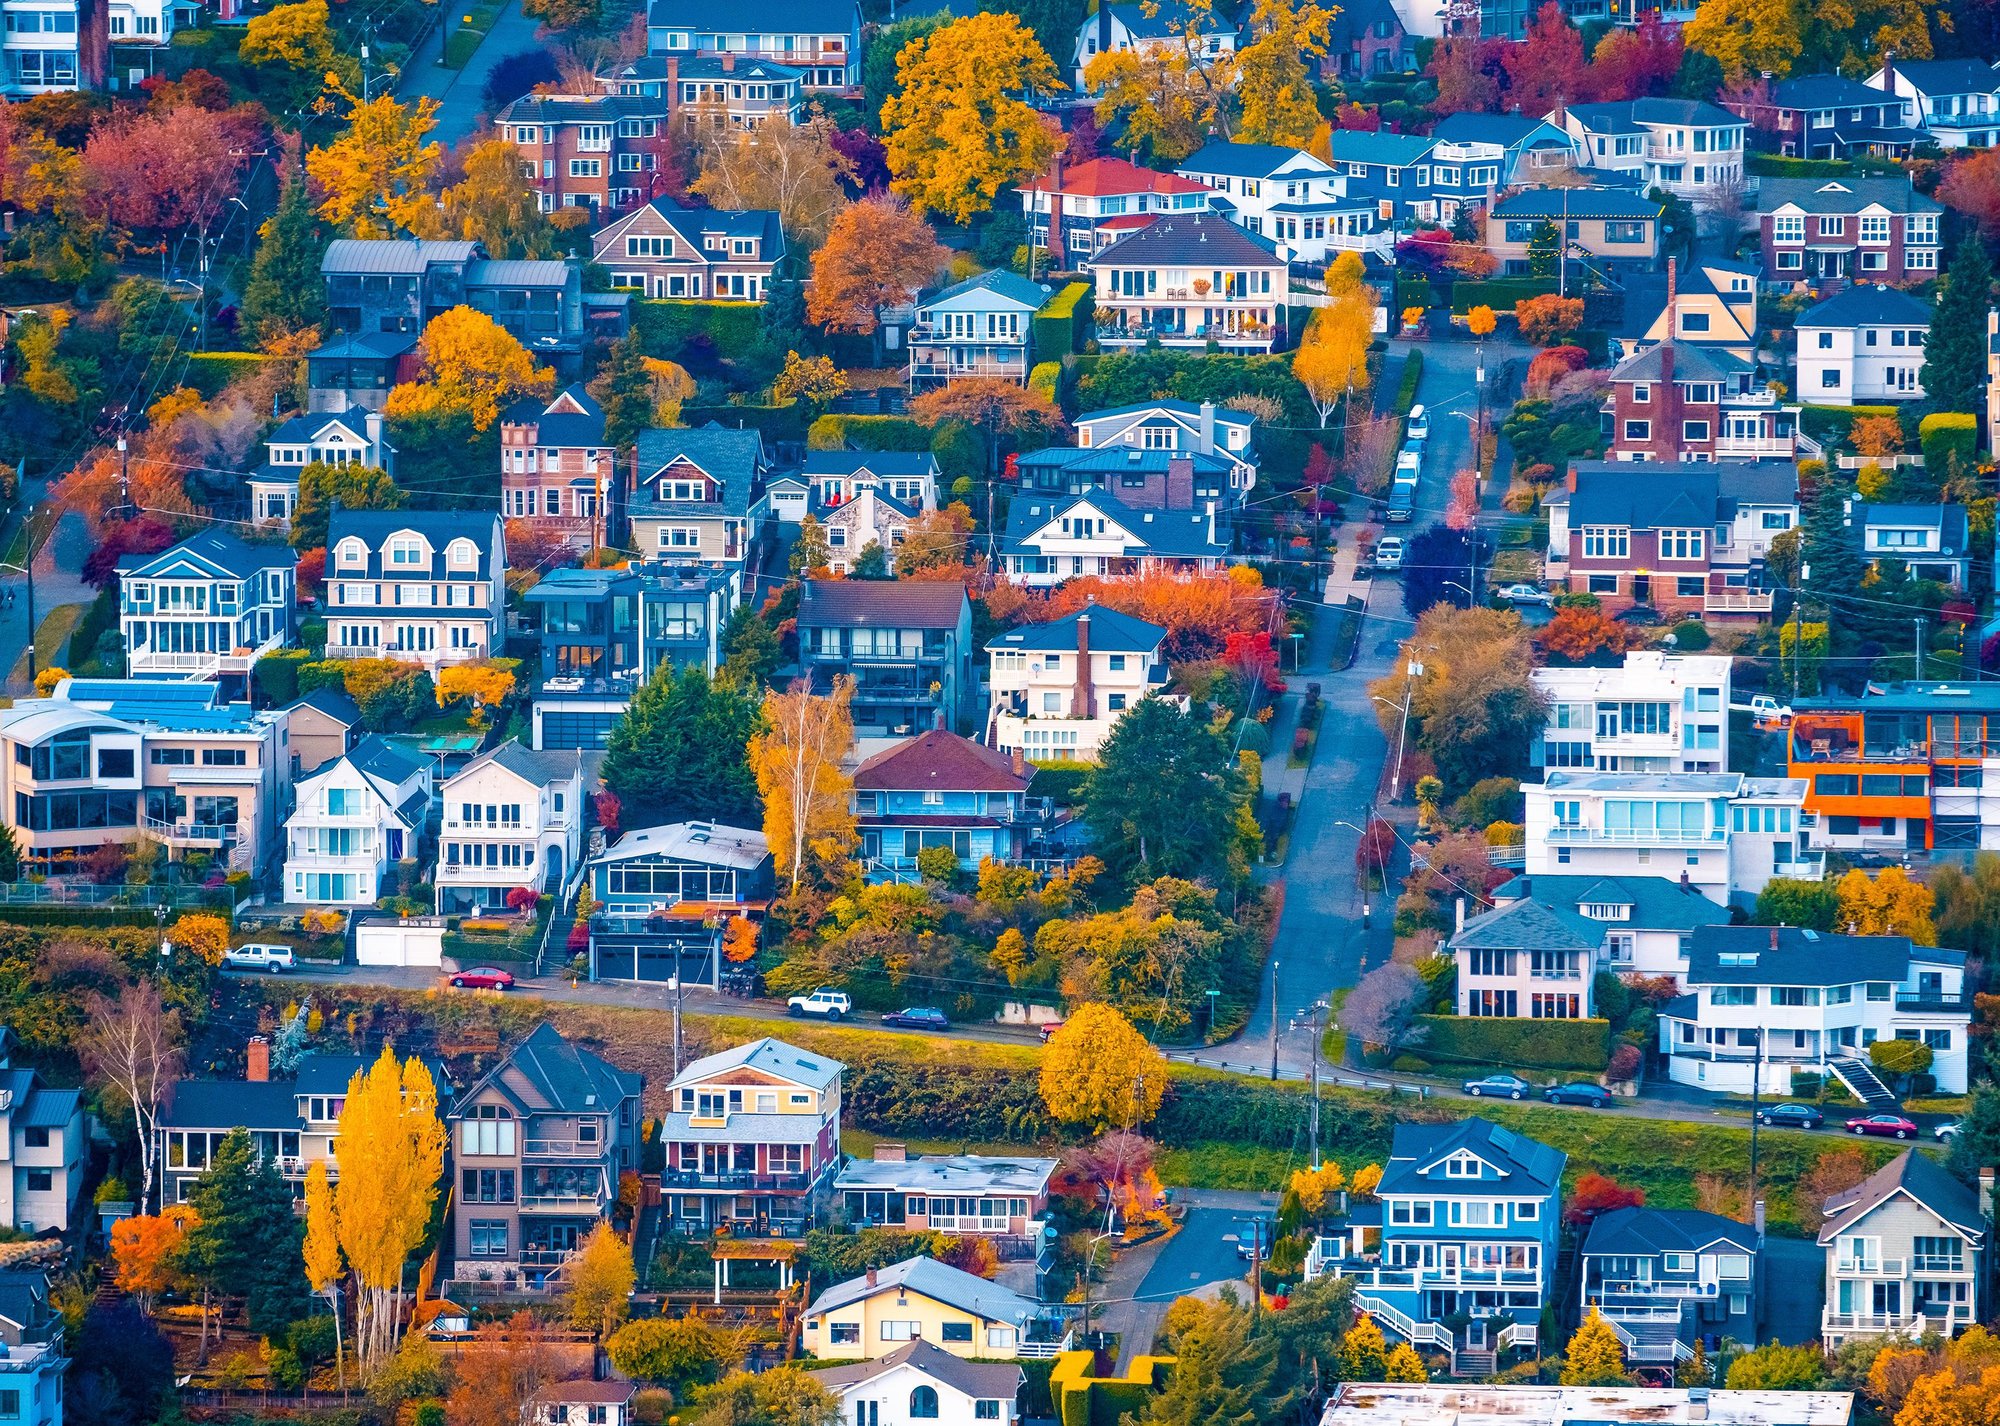 “Aerial shot of Seattle residential area” - Source: CK Foto // Shutterstock